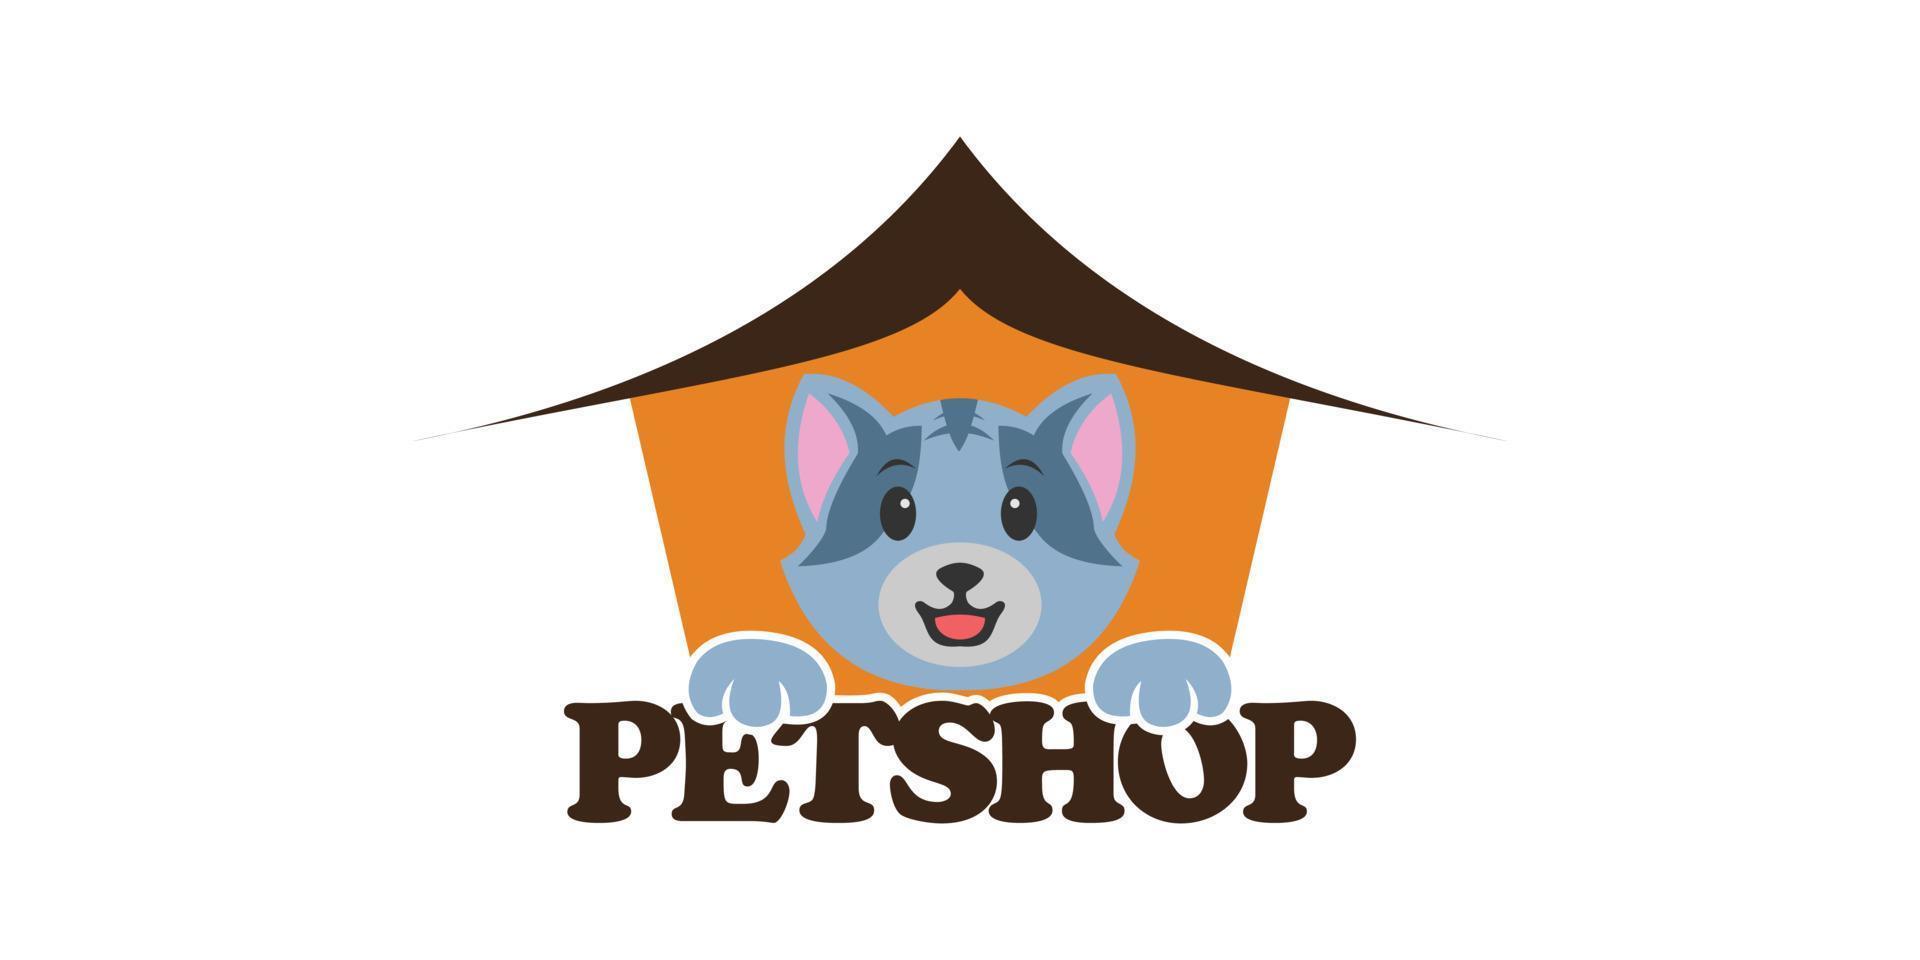 cat and dog petshop logo design template with creative concept vector